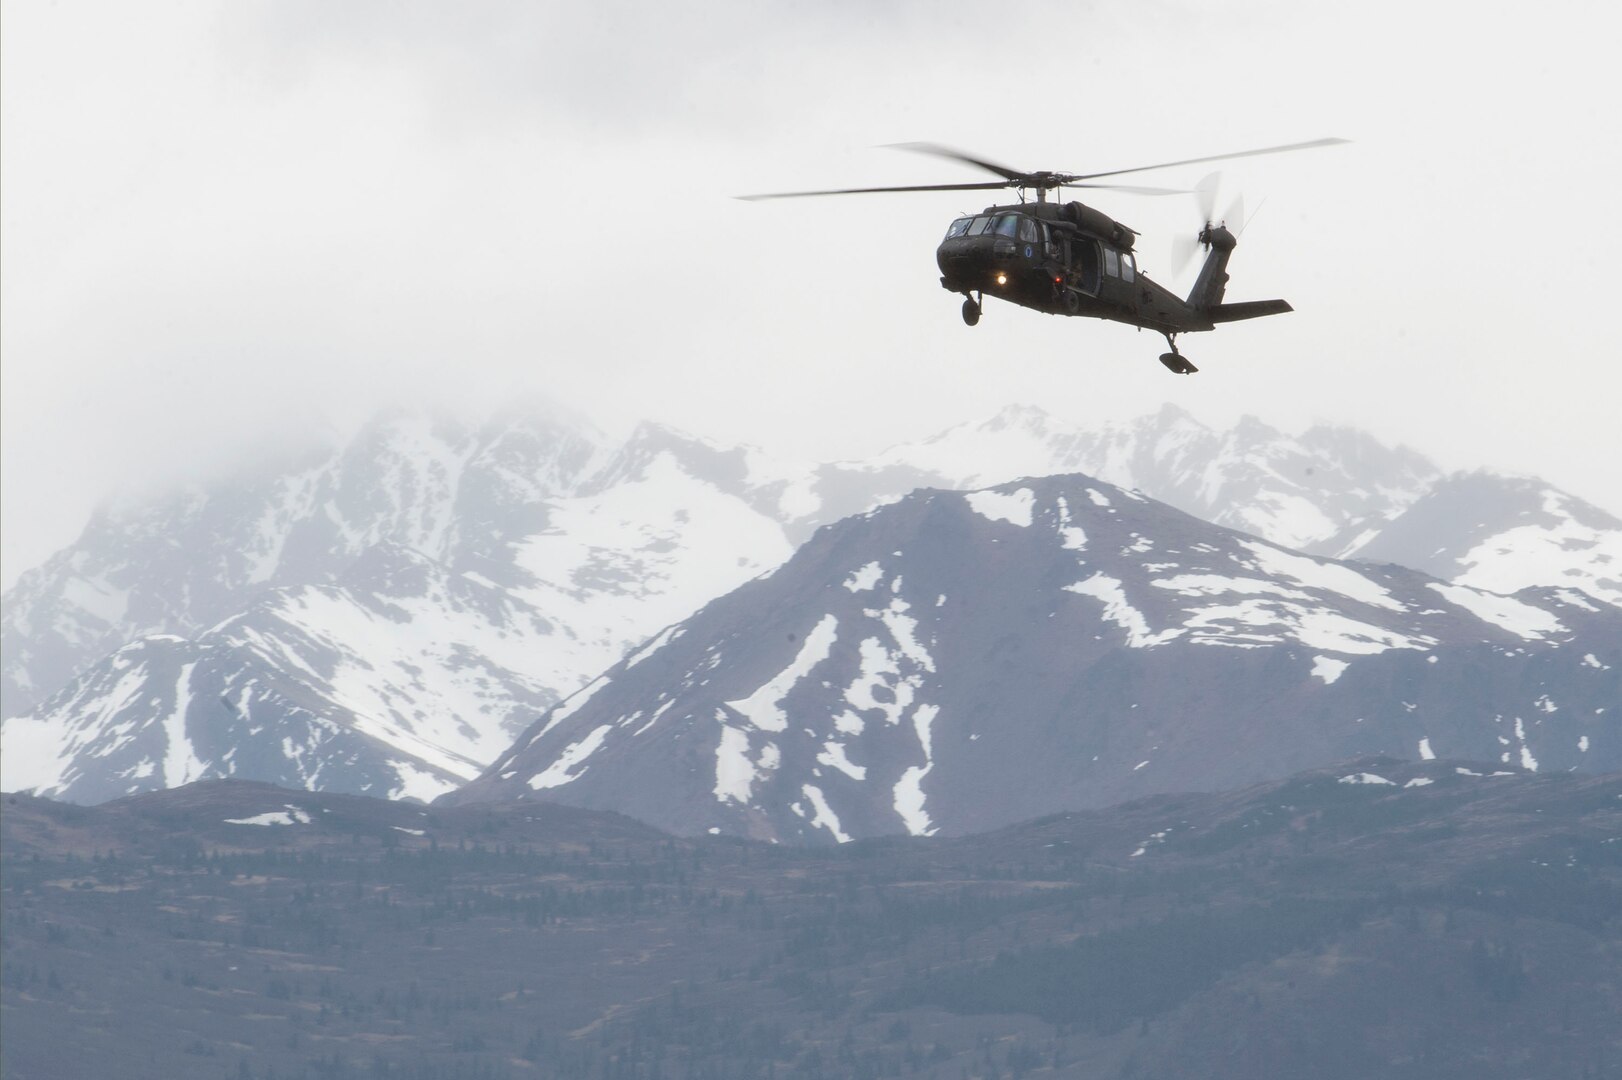 An Alaska Army National Guard UH-60 Black Hawk helicopter approaches Malemute Drop Zone during airborne training at Joint Base Elmendorf-Richardson, Alaska, May 30, 2018. A similar aircraft rescued three people near St. Mary's after a plane crash on Sept. 3, 2018.